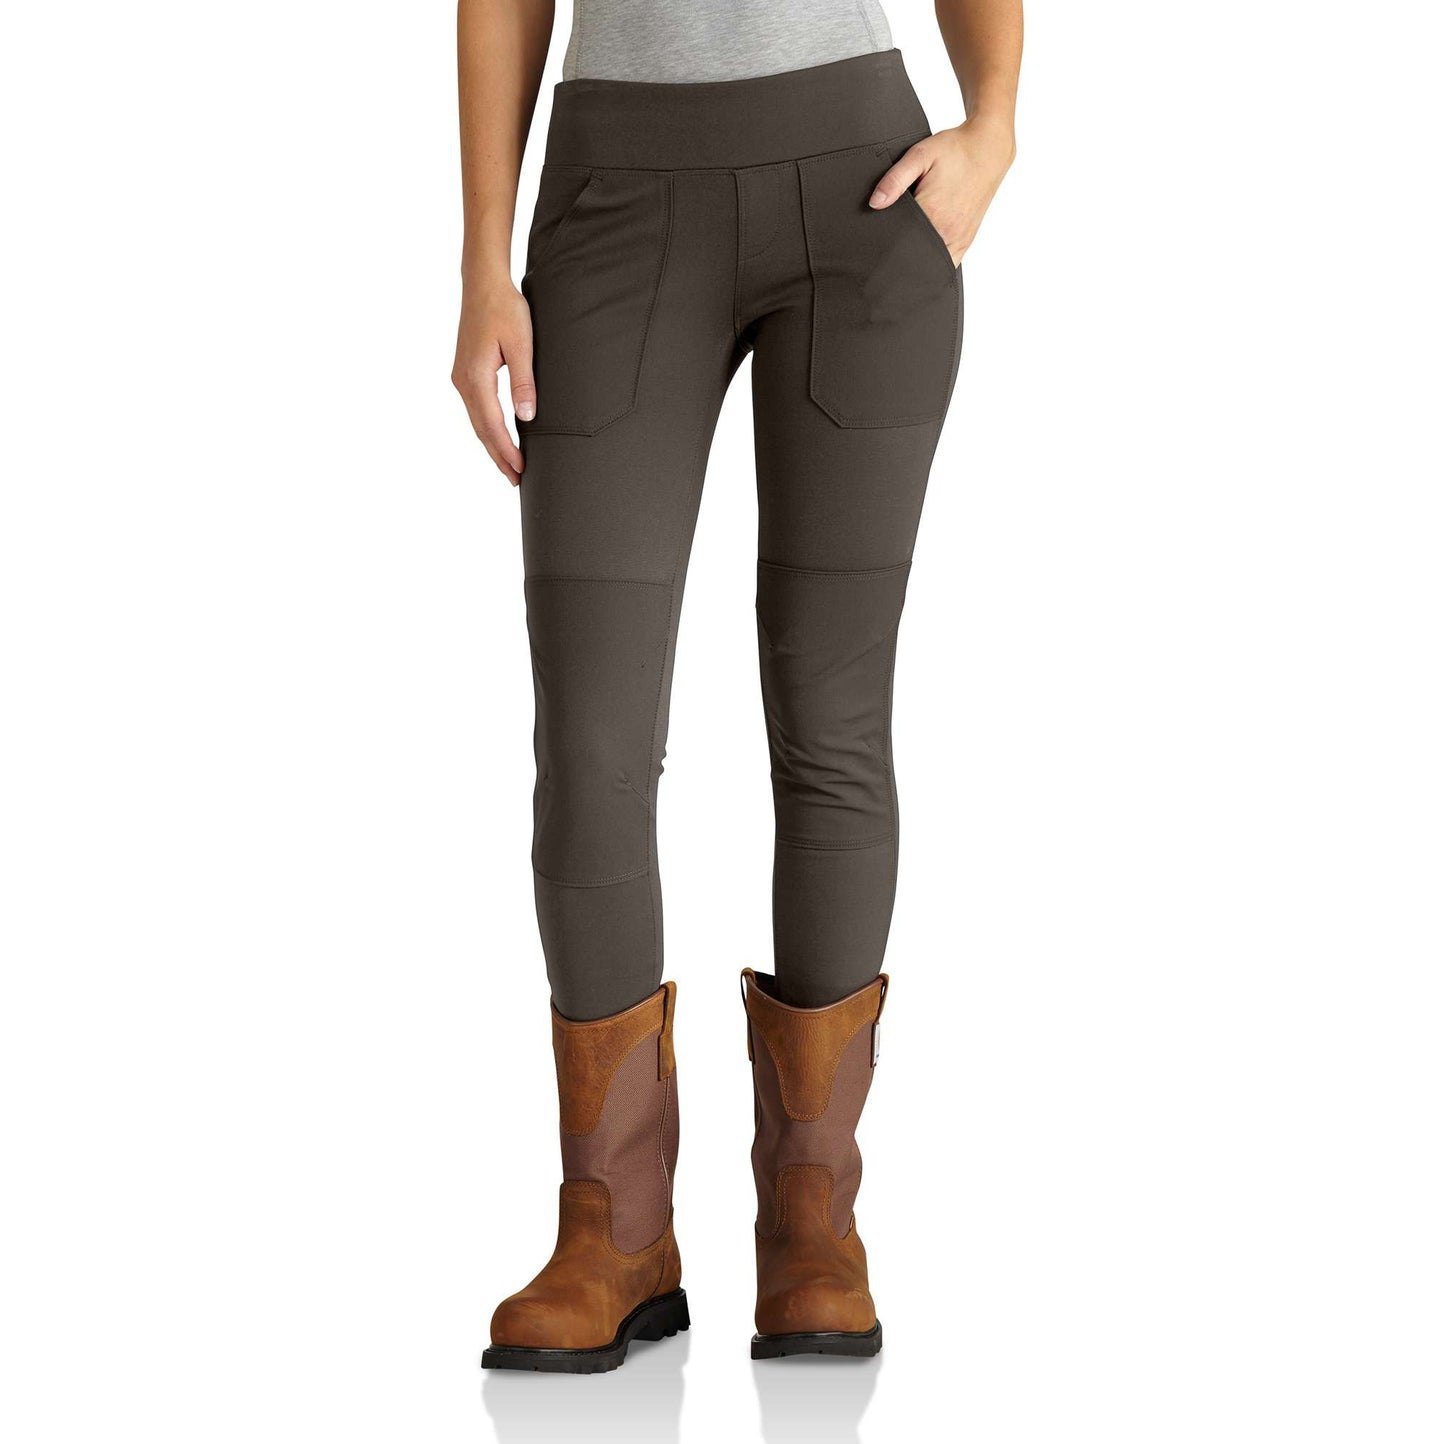 Farm & Home Hardware - Our Force Utility Leggings are meant to get dirty. # carhartt